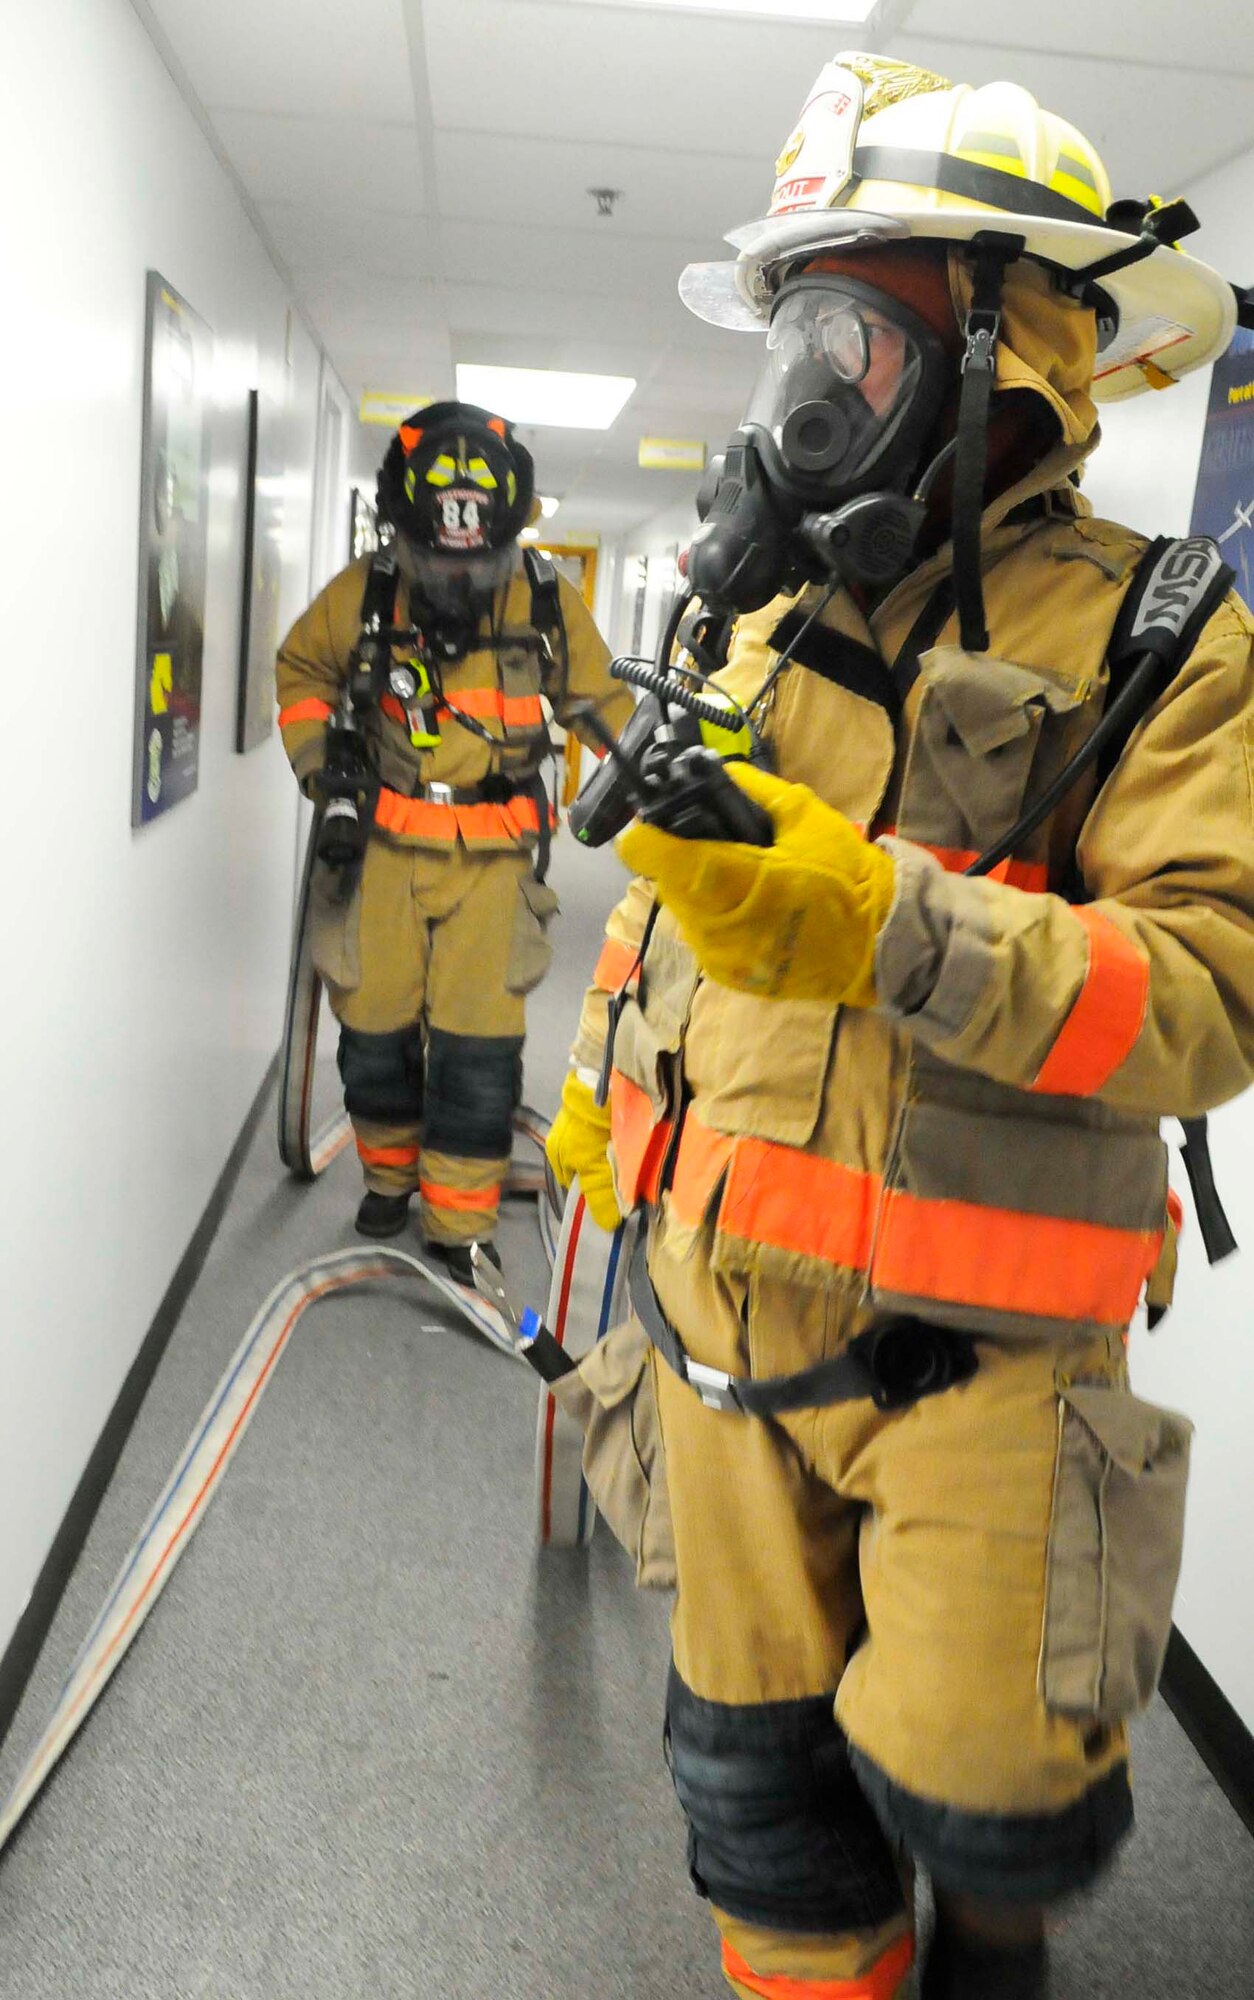 Ronald Strout, Station chief, (foreground) and Mark Gibson, Robins firefighter, do a search through  Bldg. 301 in response to a simulated structure fire there Sept. 15 during Operationa Readiness Exercises. U. S. Air Force photo by Sue Sapp